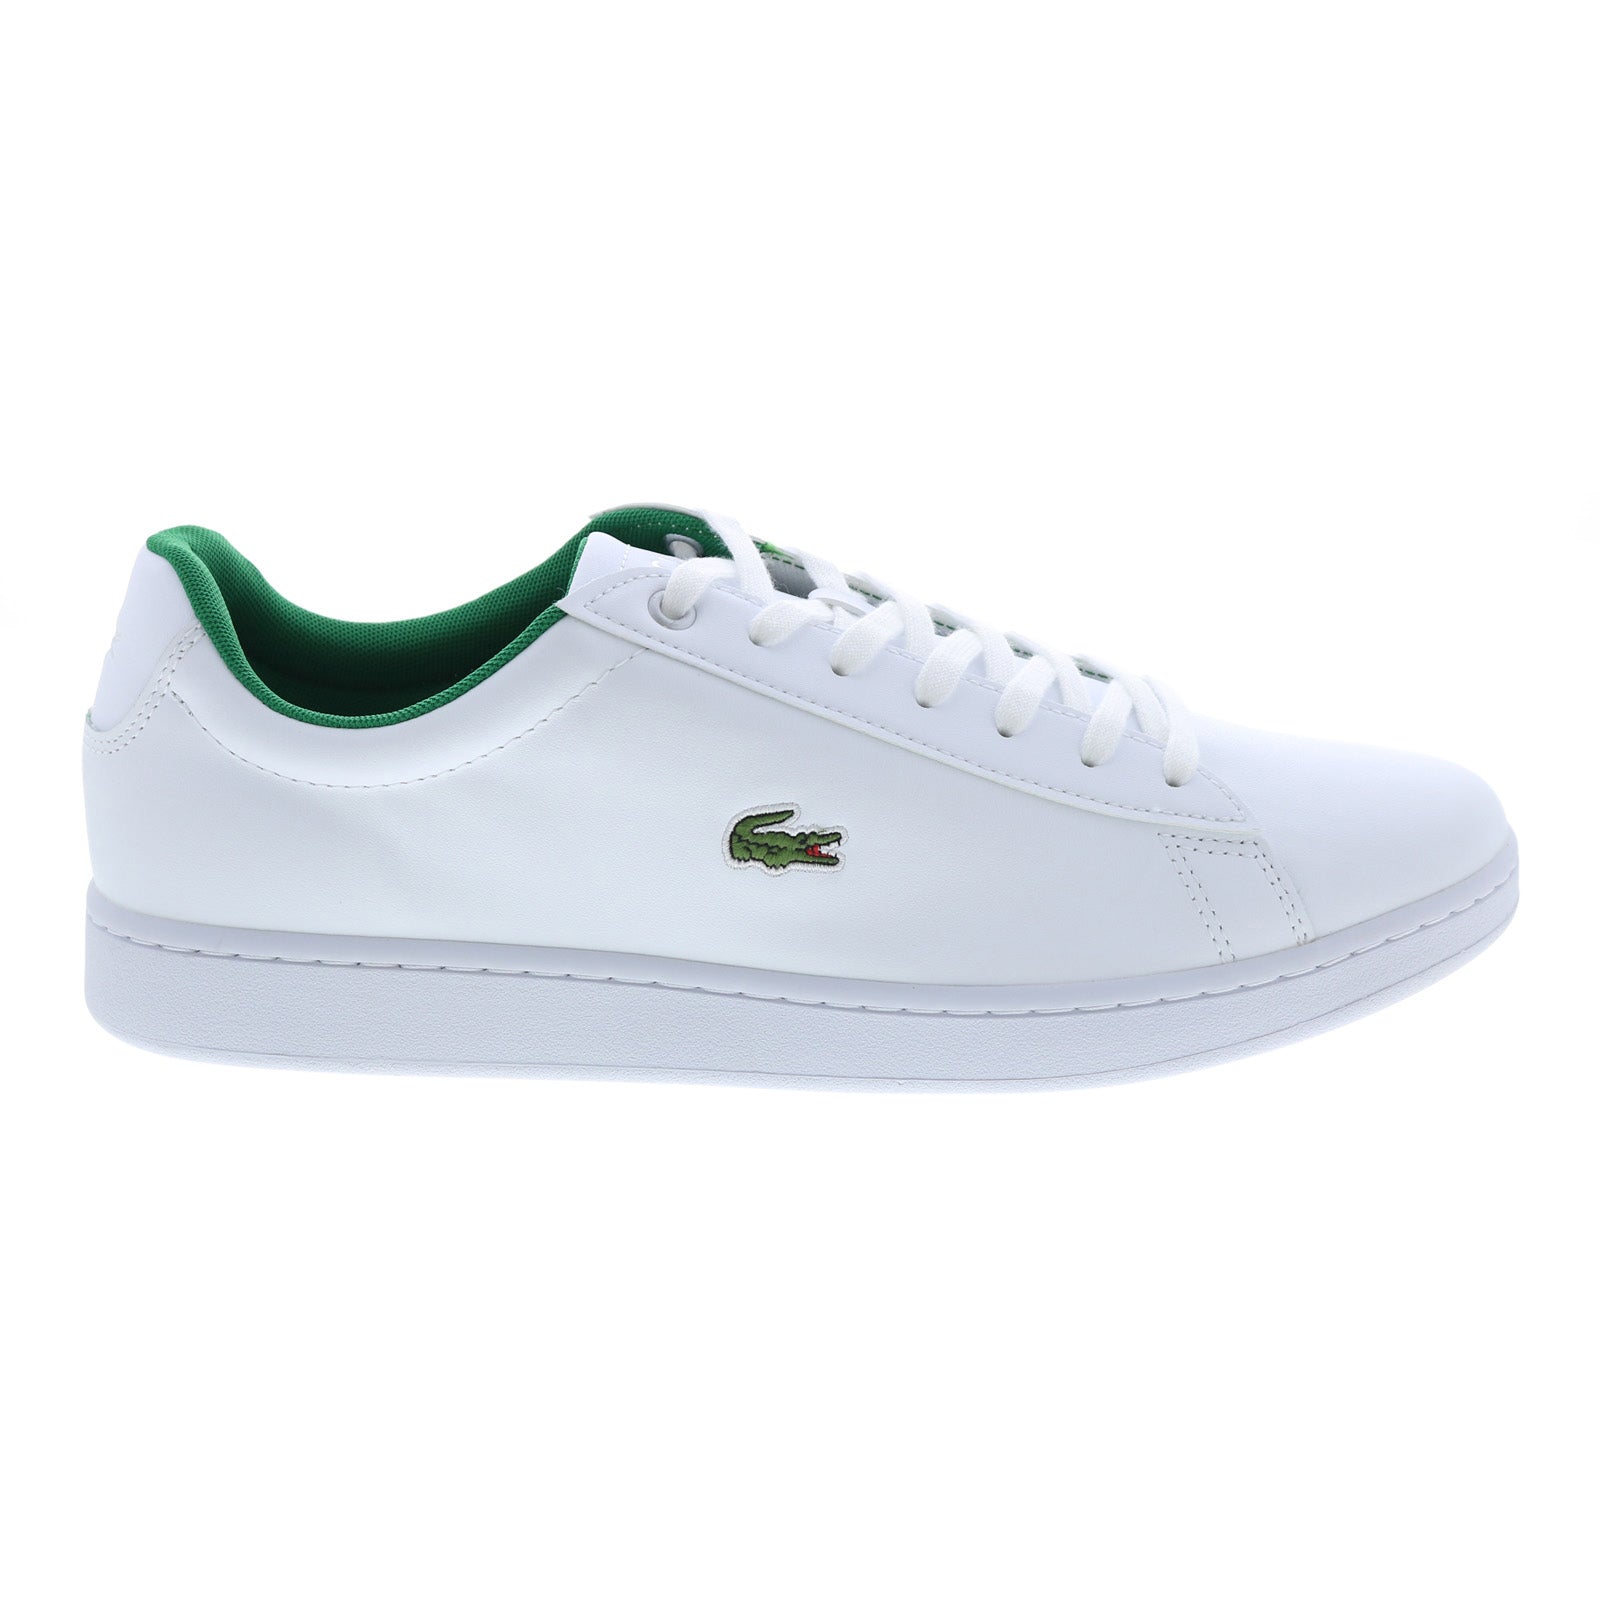 Lacoste Hydez 1 P Sma Mens White Leather Lifestyle Sneakers Ruze Shoes